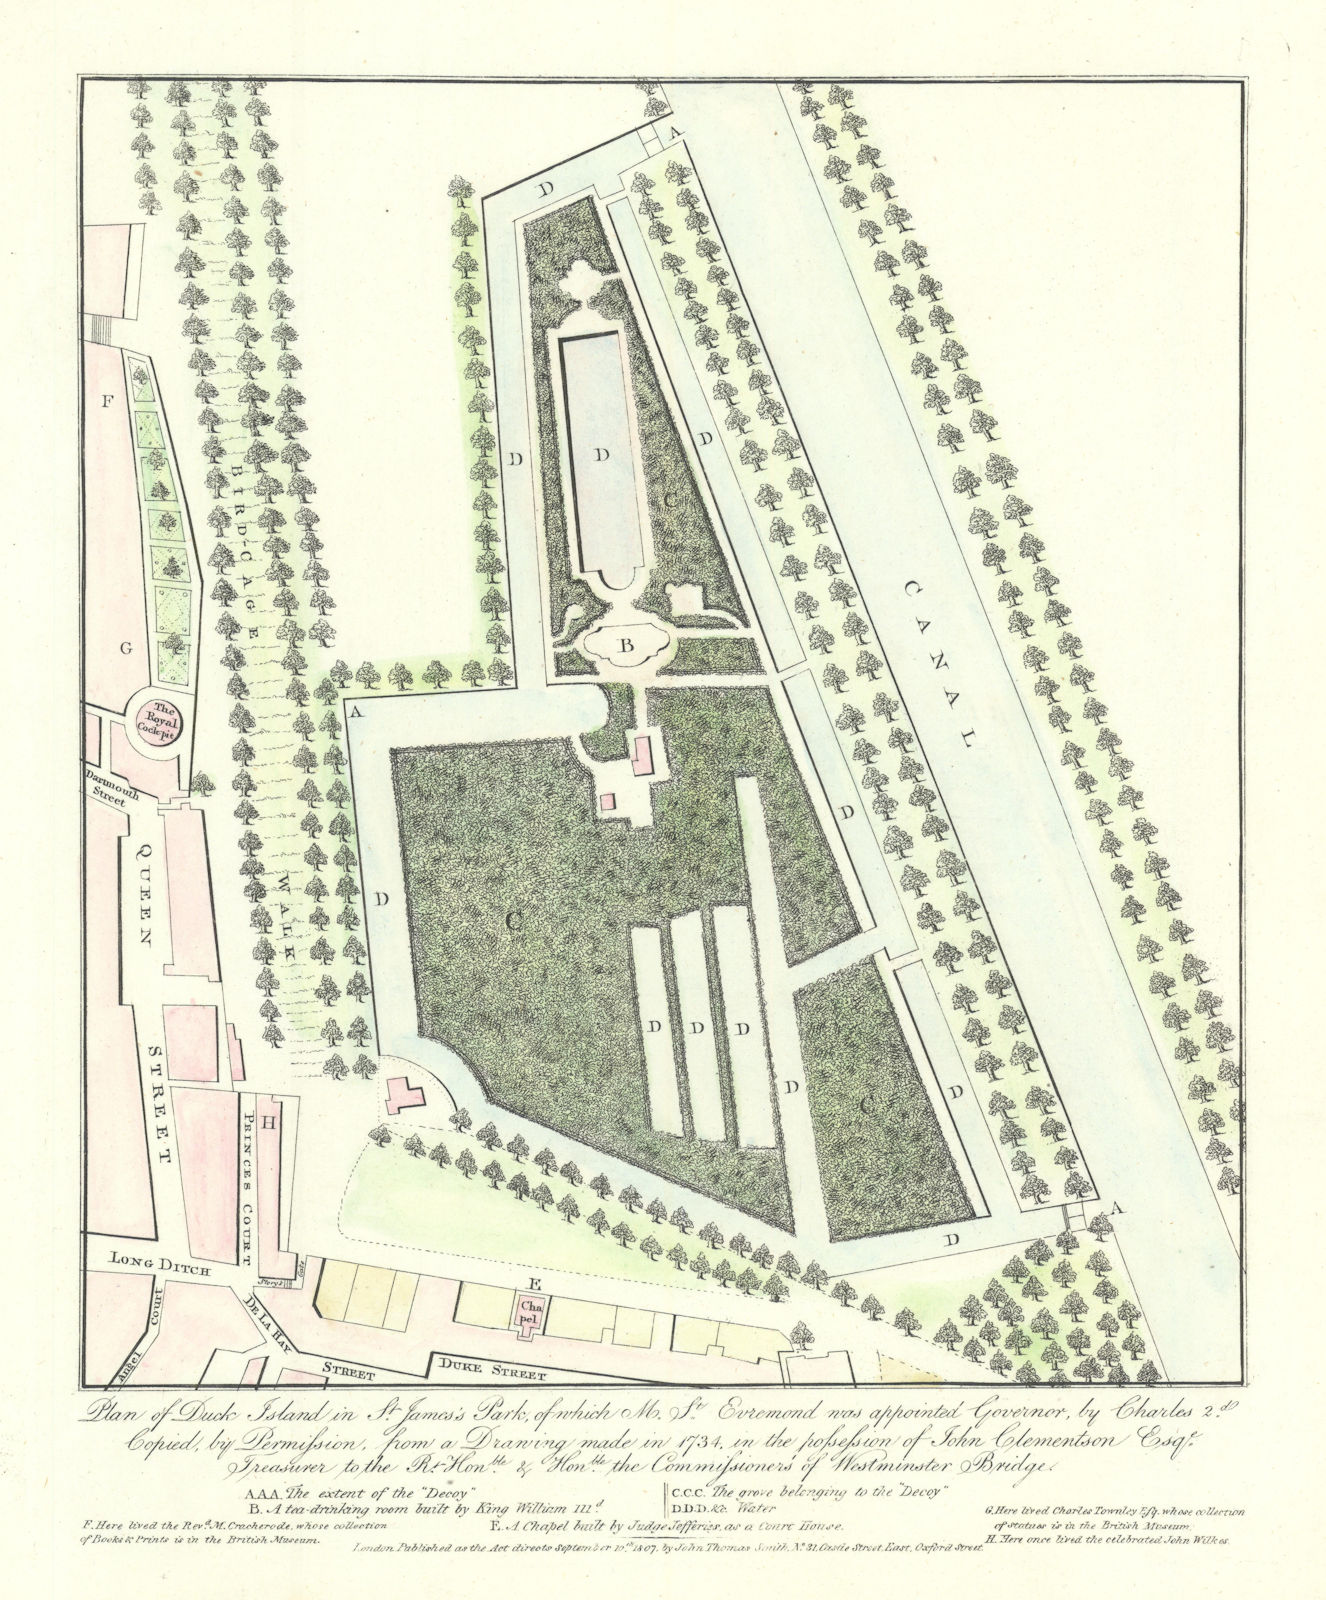 Associate Product Plan of Duck Island in St James's Park in 1734. J.T. SMITH 1807 old map